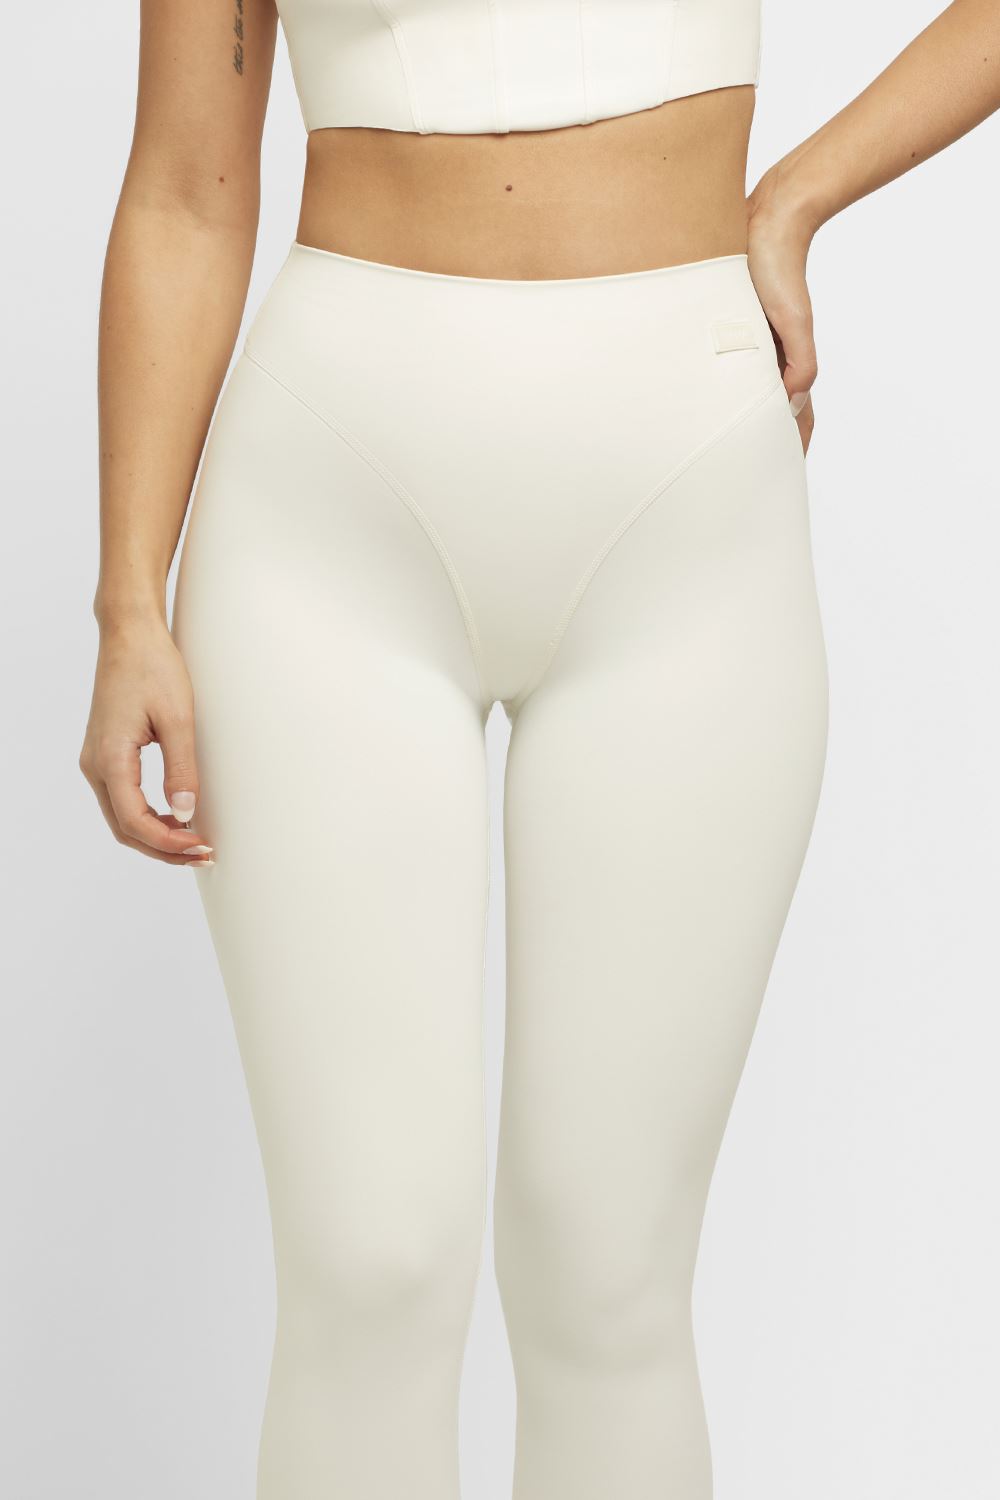 LUX Lyra Cotton Stretchable Full length Churidar Lycra Leggings for women -  Cream - Frozentags - Ladies Dress Materials